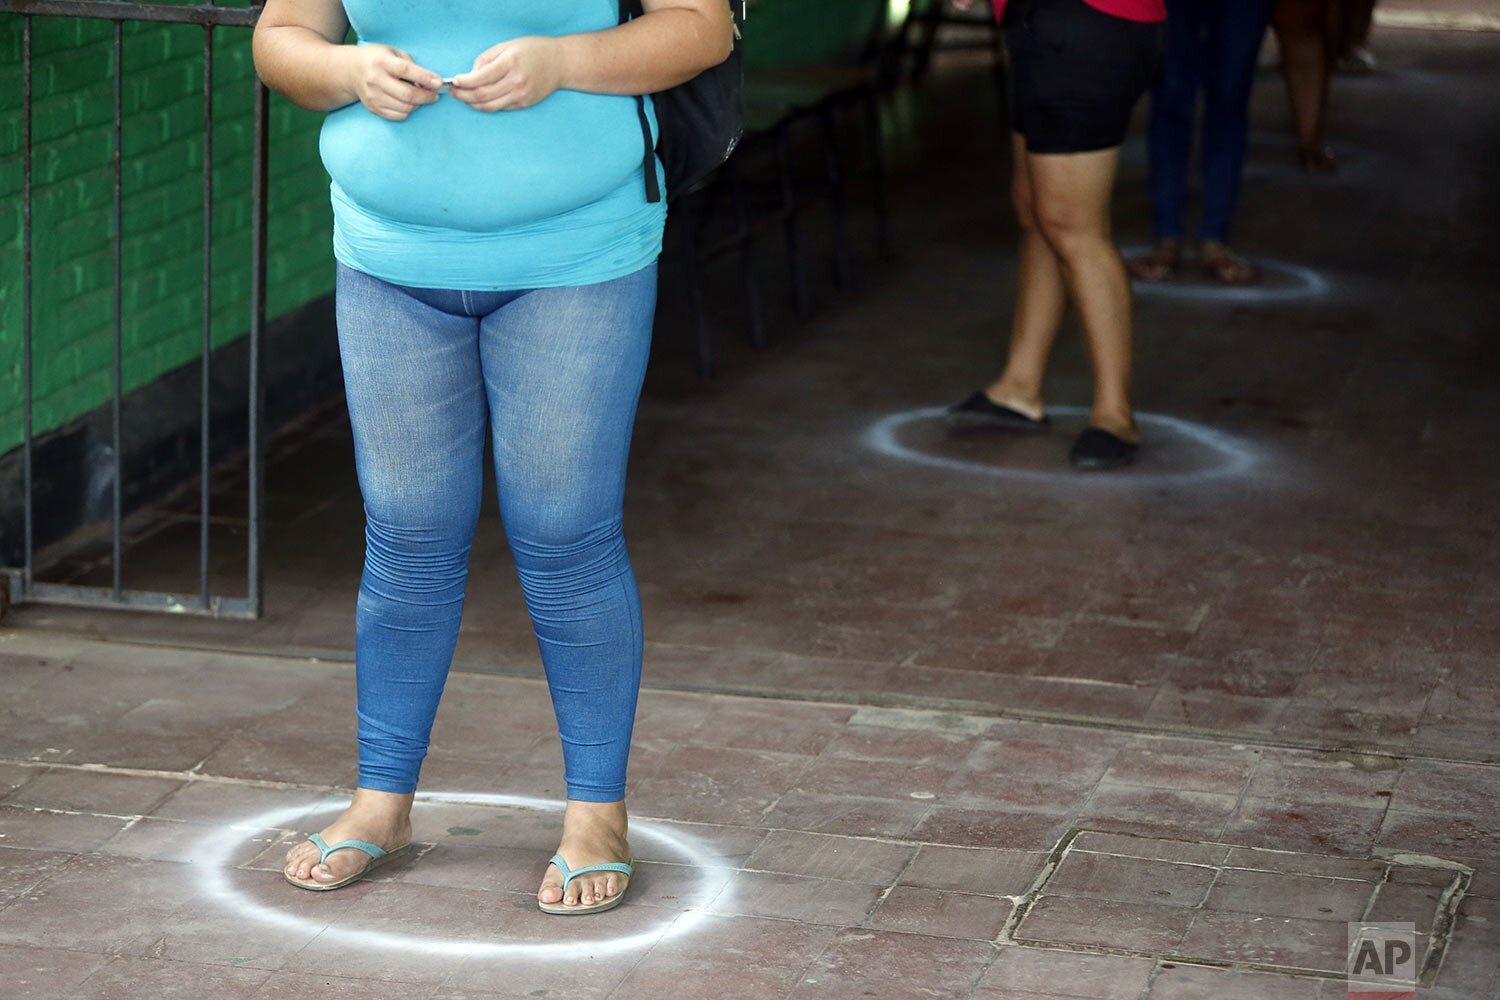  People stand in designated areas, to practice social distancing amid the spread of the new coronavirus, as they line up for free food staples at Santa Ana primary school in Asuncion, Paraguay, March 31, 2020, part of an already existing food program